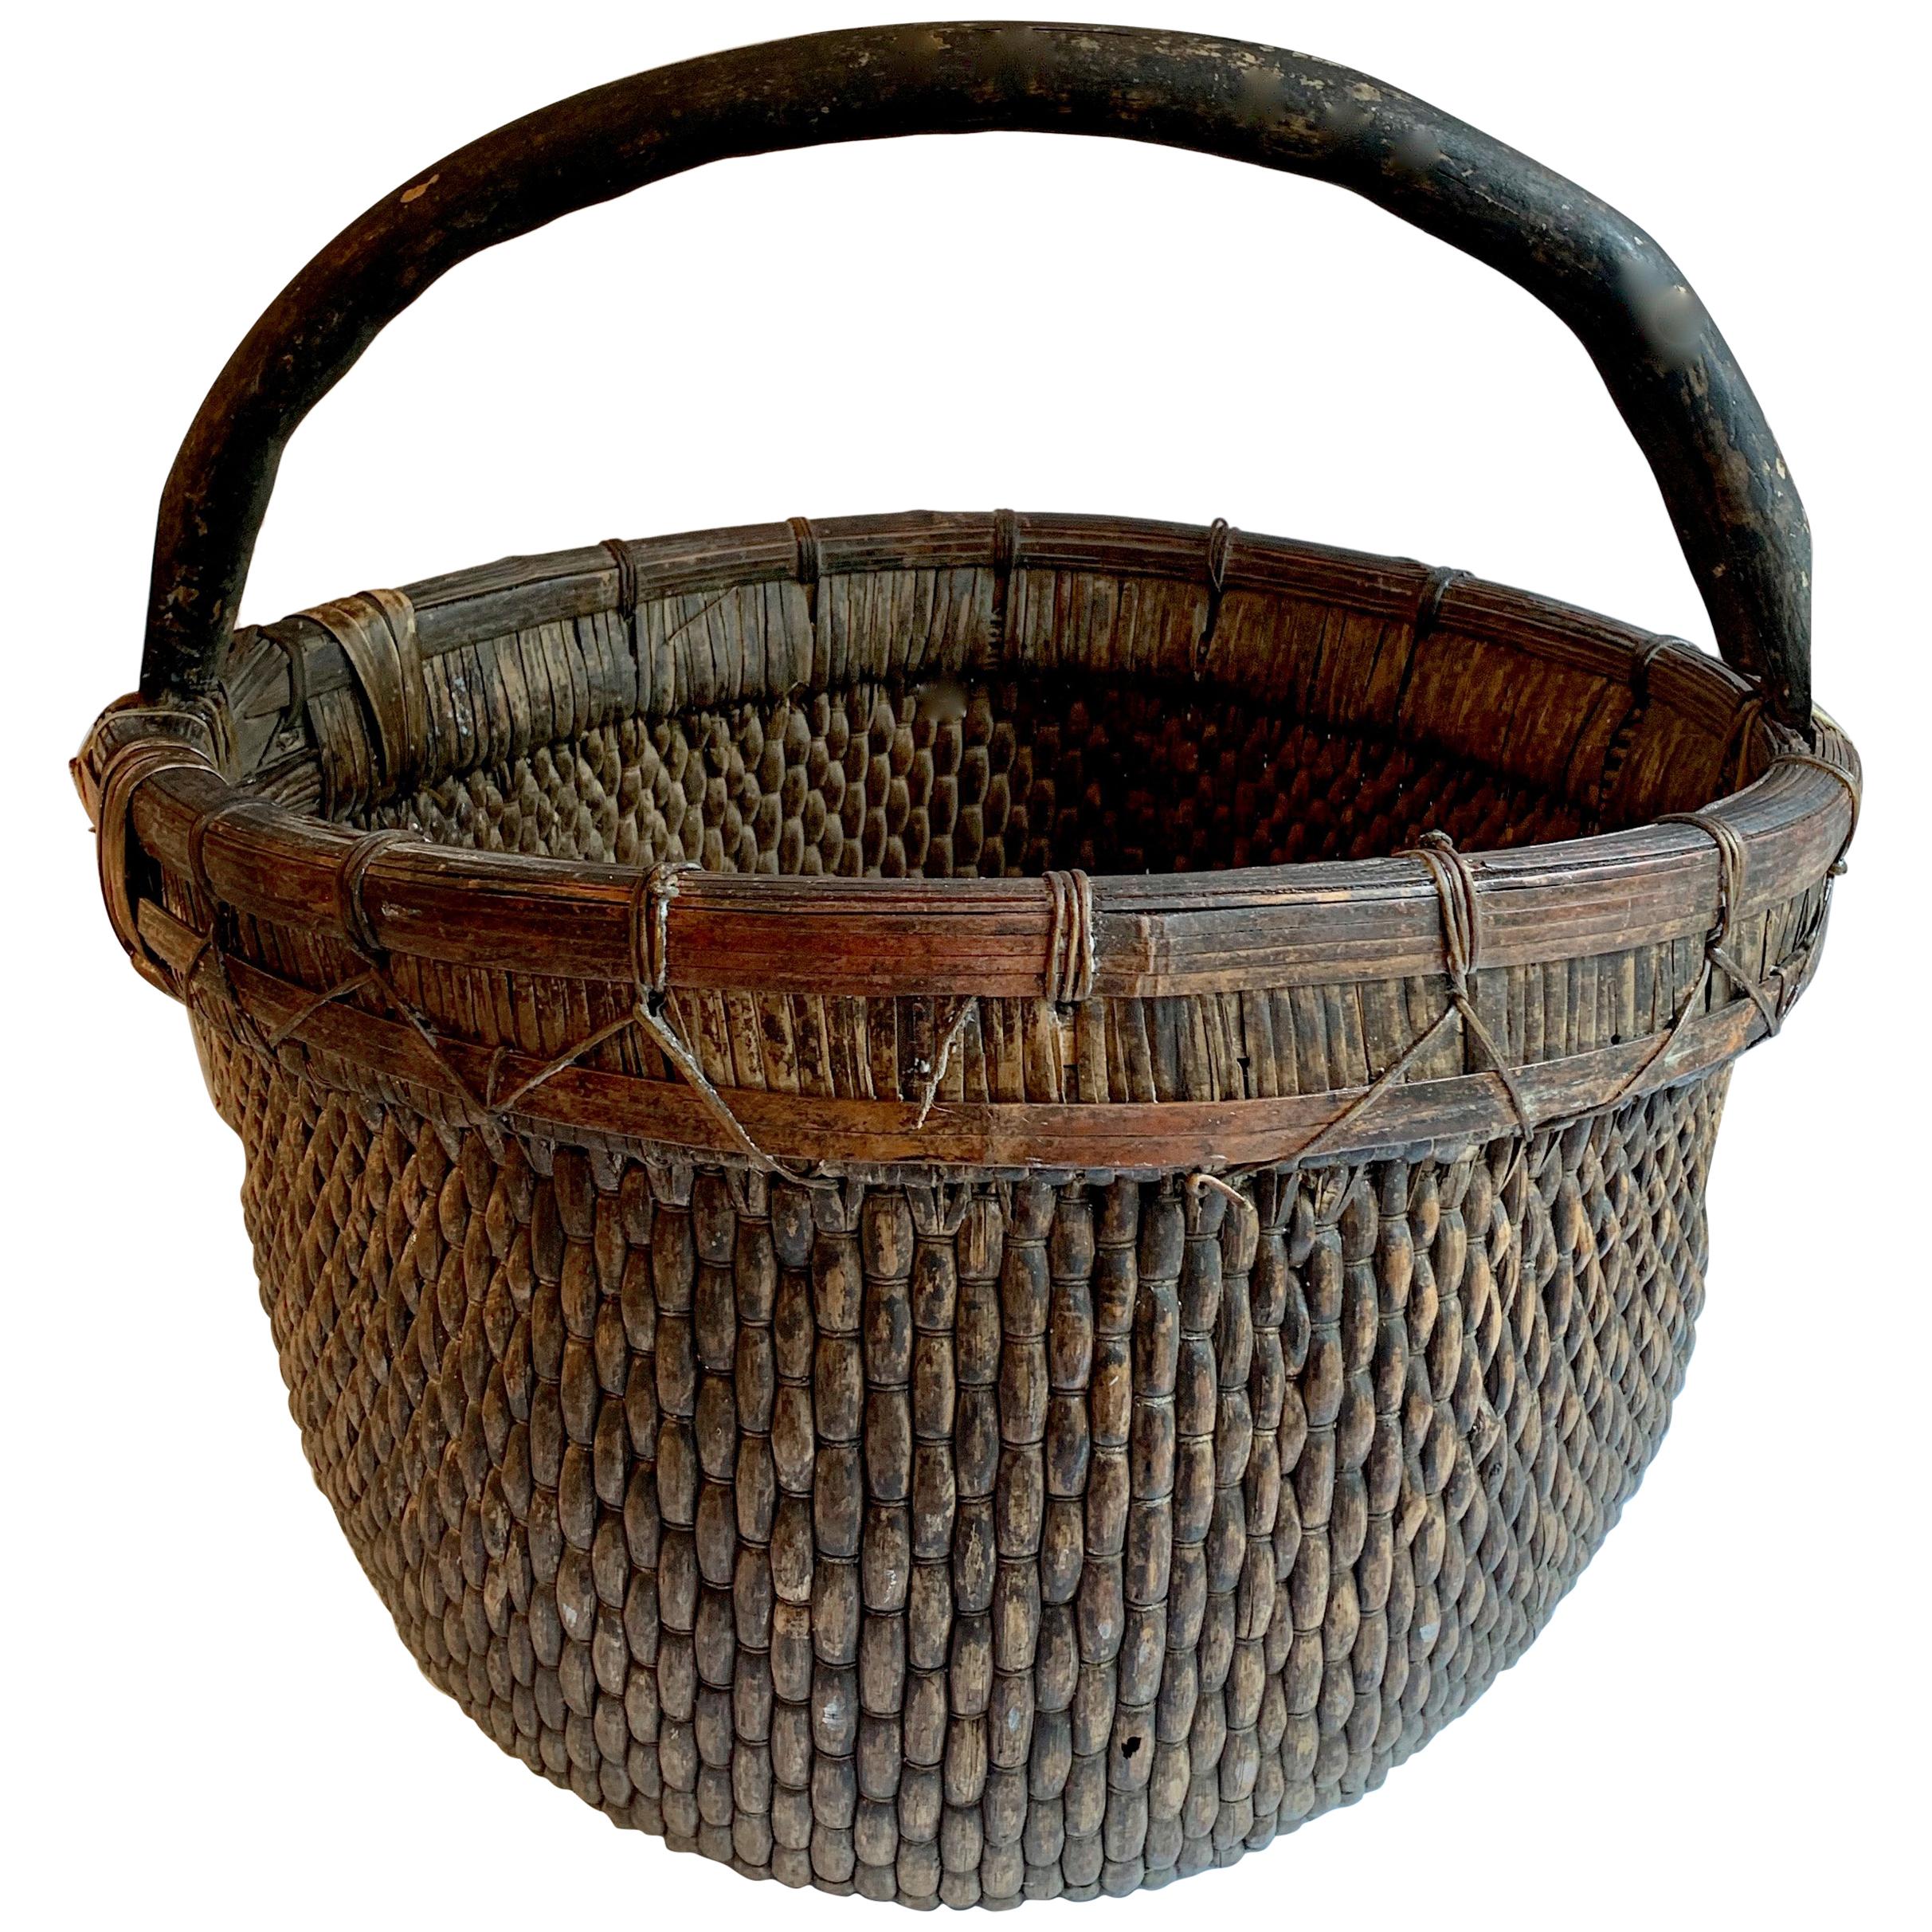 Woven Chinese Willow Basket with Handle